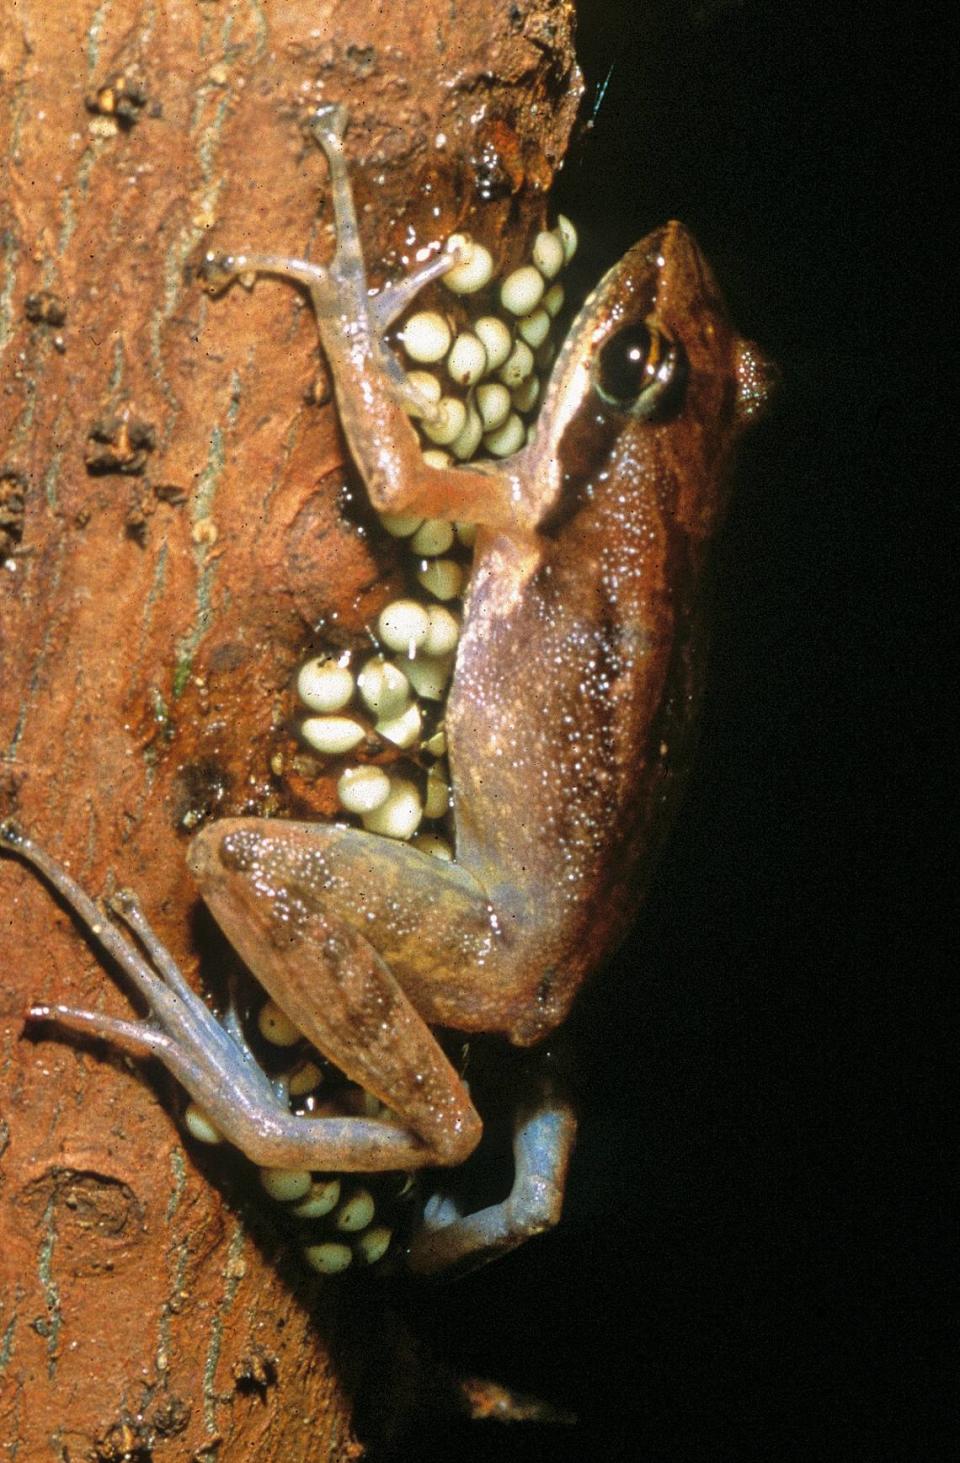 A Blommersia bara frog guarding its eggs.